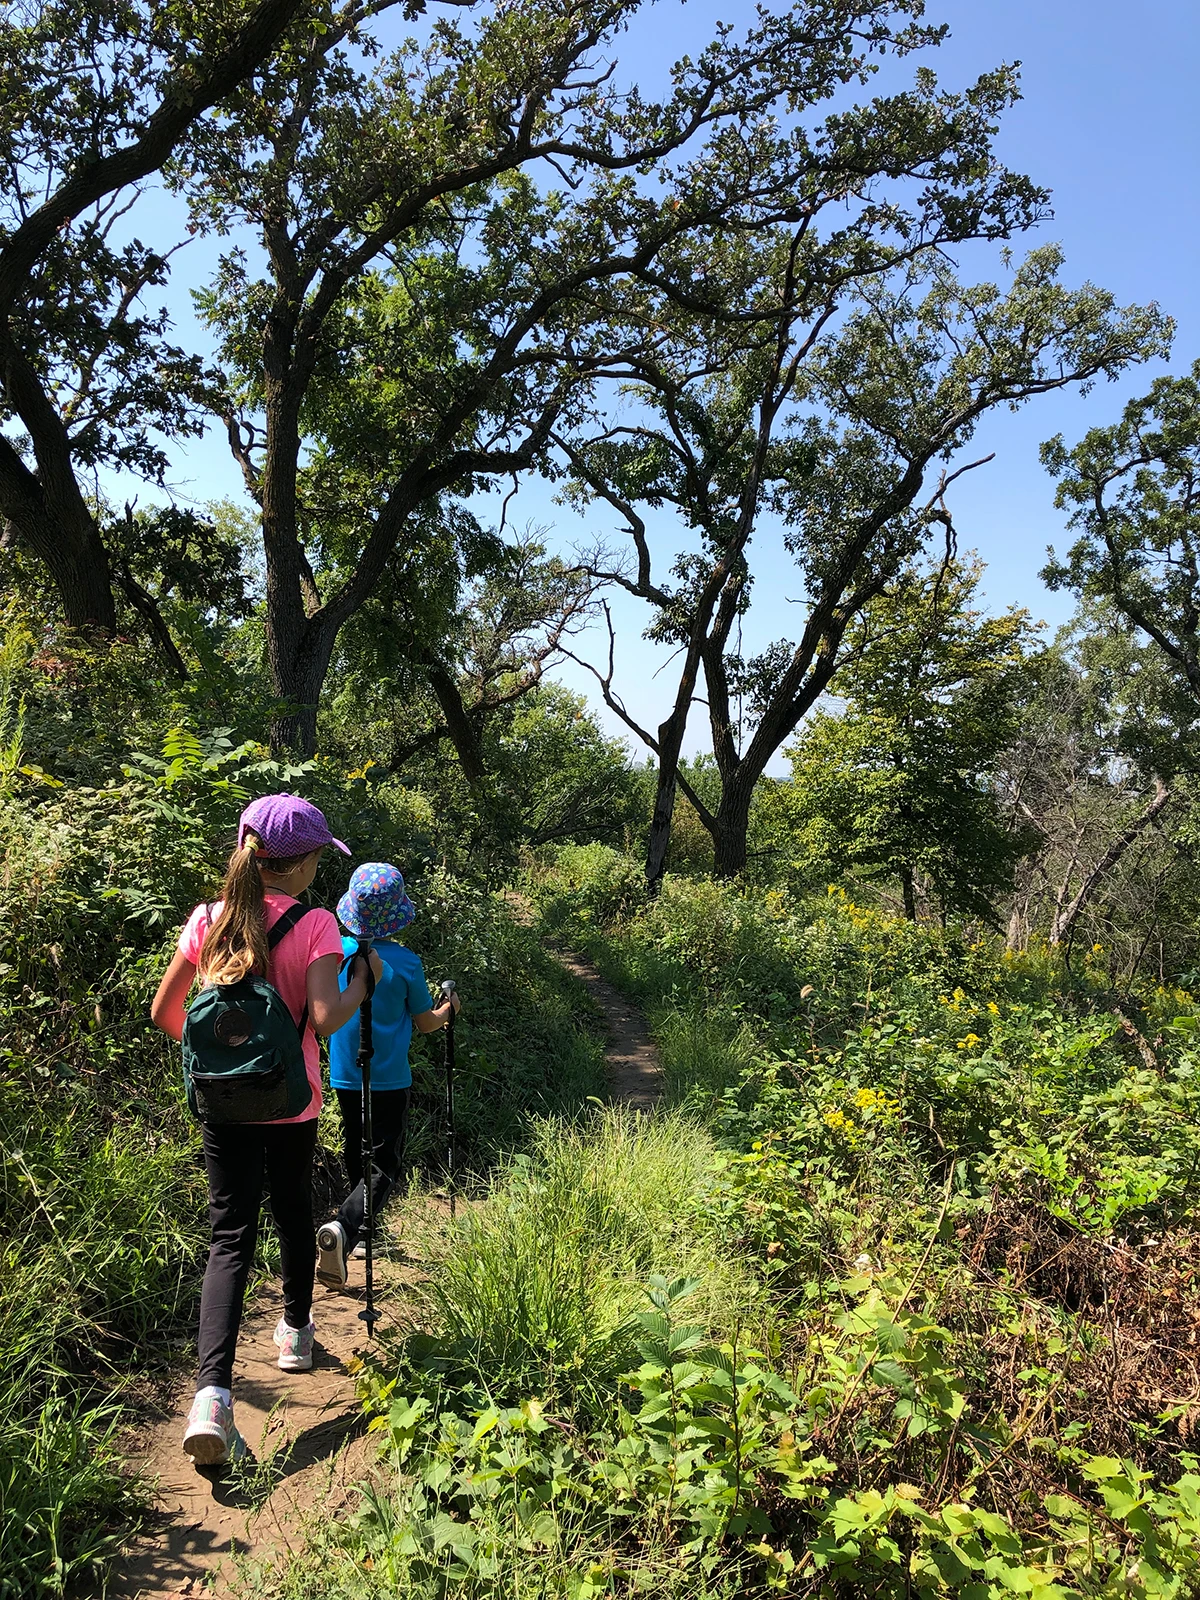 hiking in Iowa with kids young children on a trail with trees and shrubs surrounding them